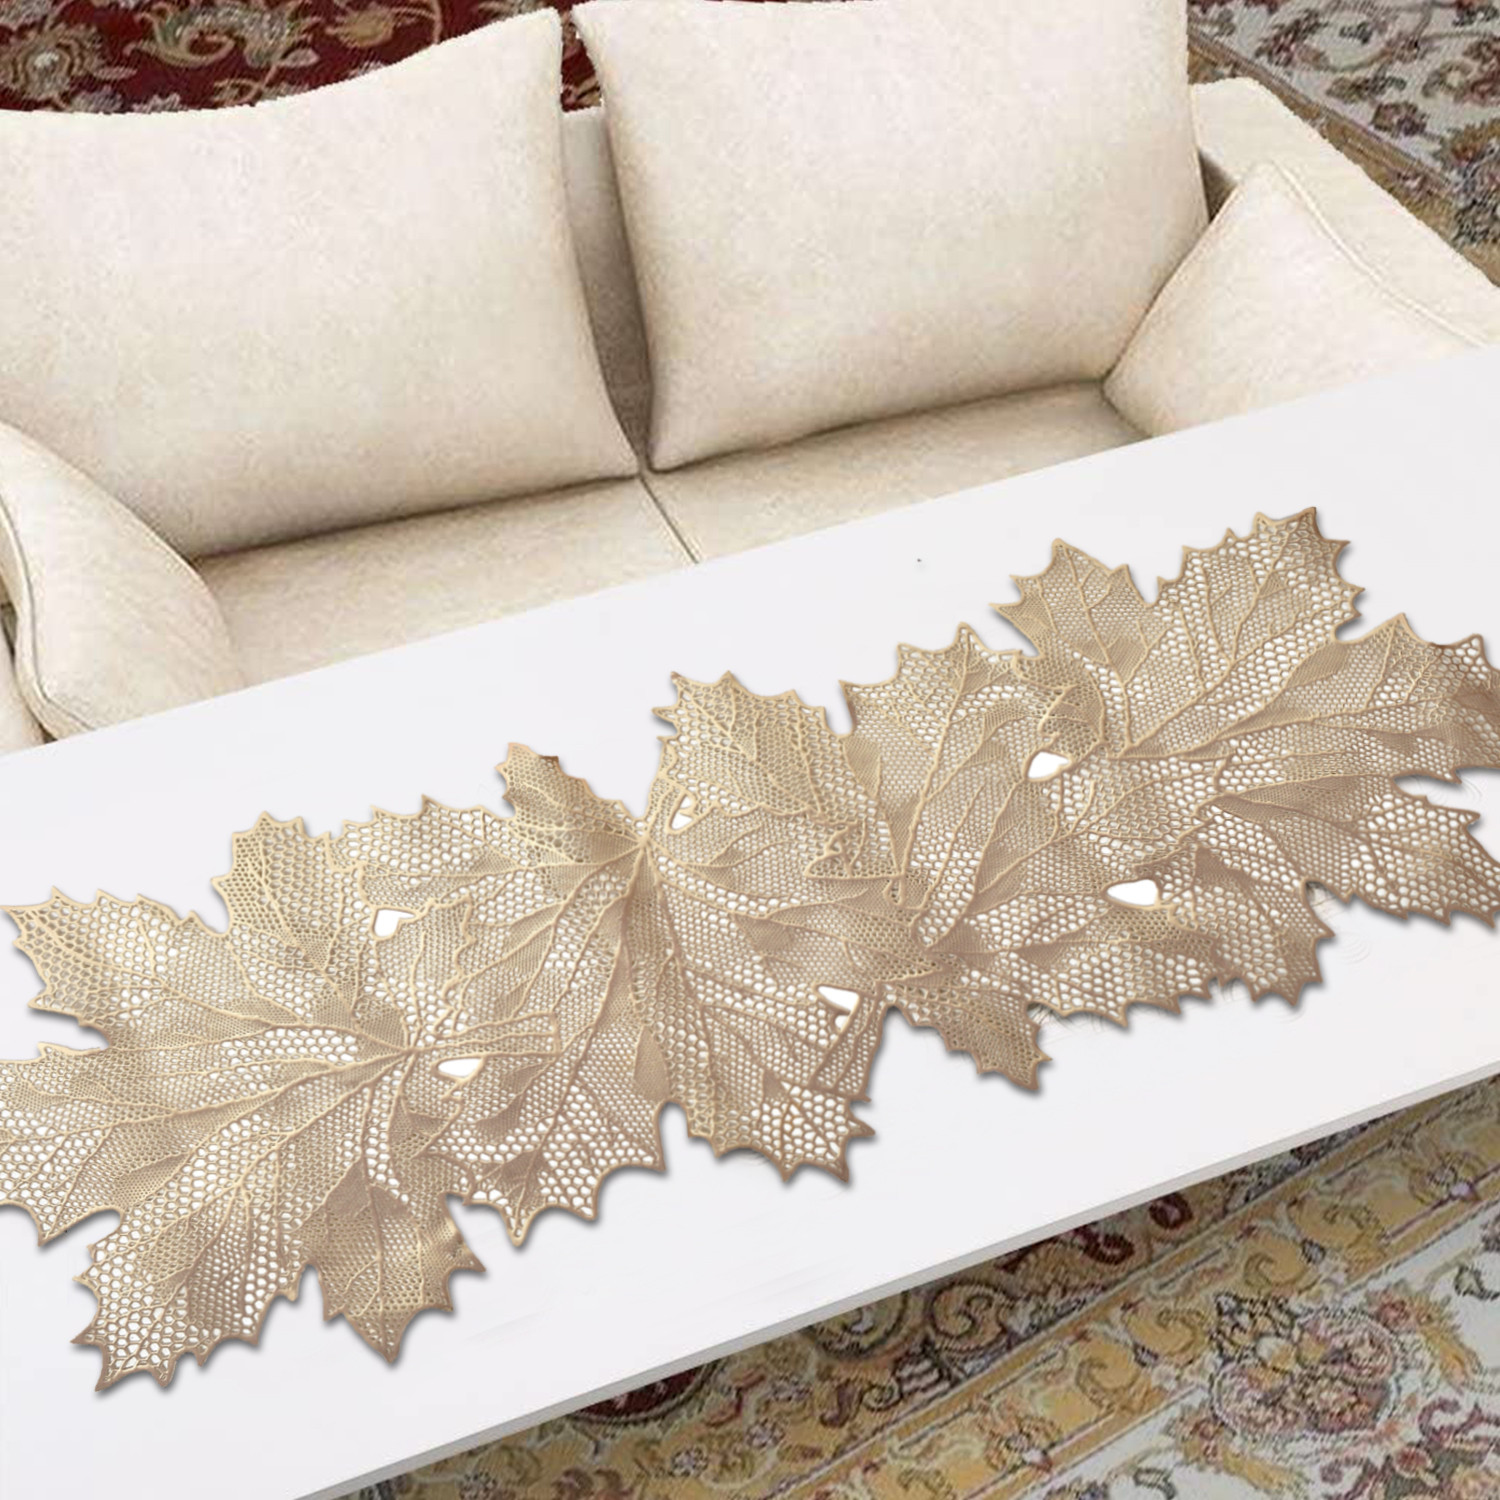 Kuber Industries Leaf Design Soft Leather Table Runner For Patios Family Dinner Office Kitchen Table (Gold)-HS43KUBMART26601